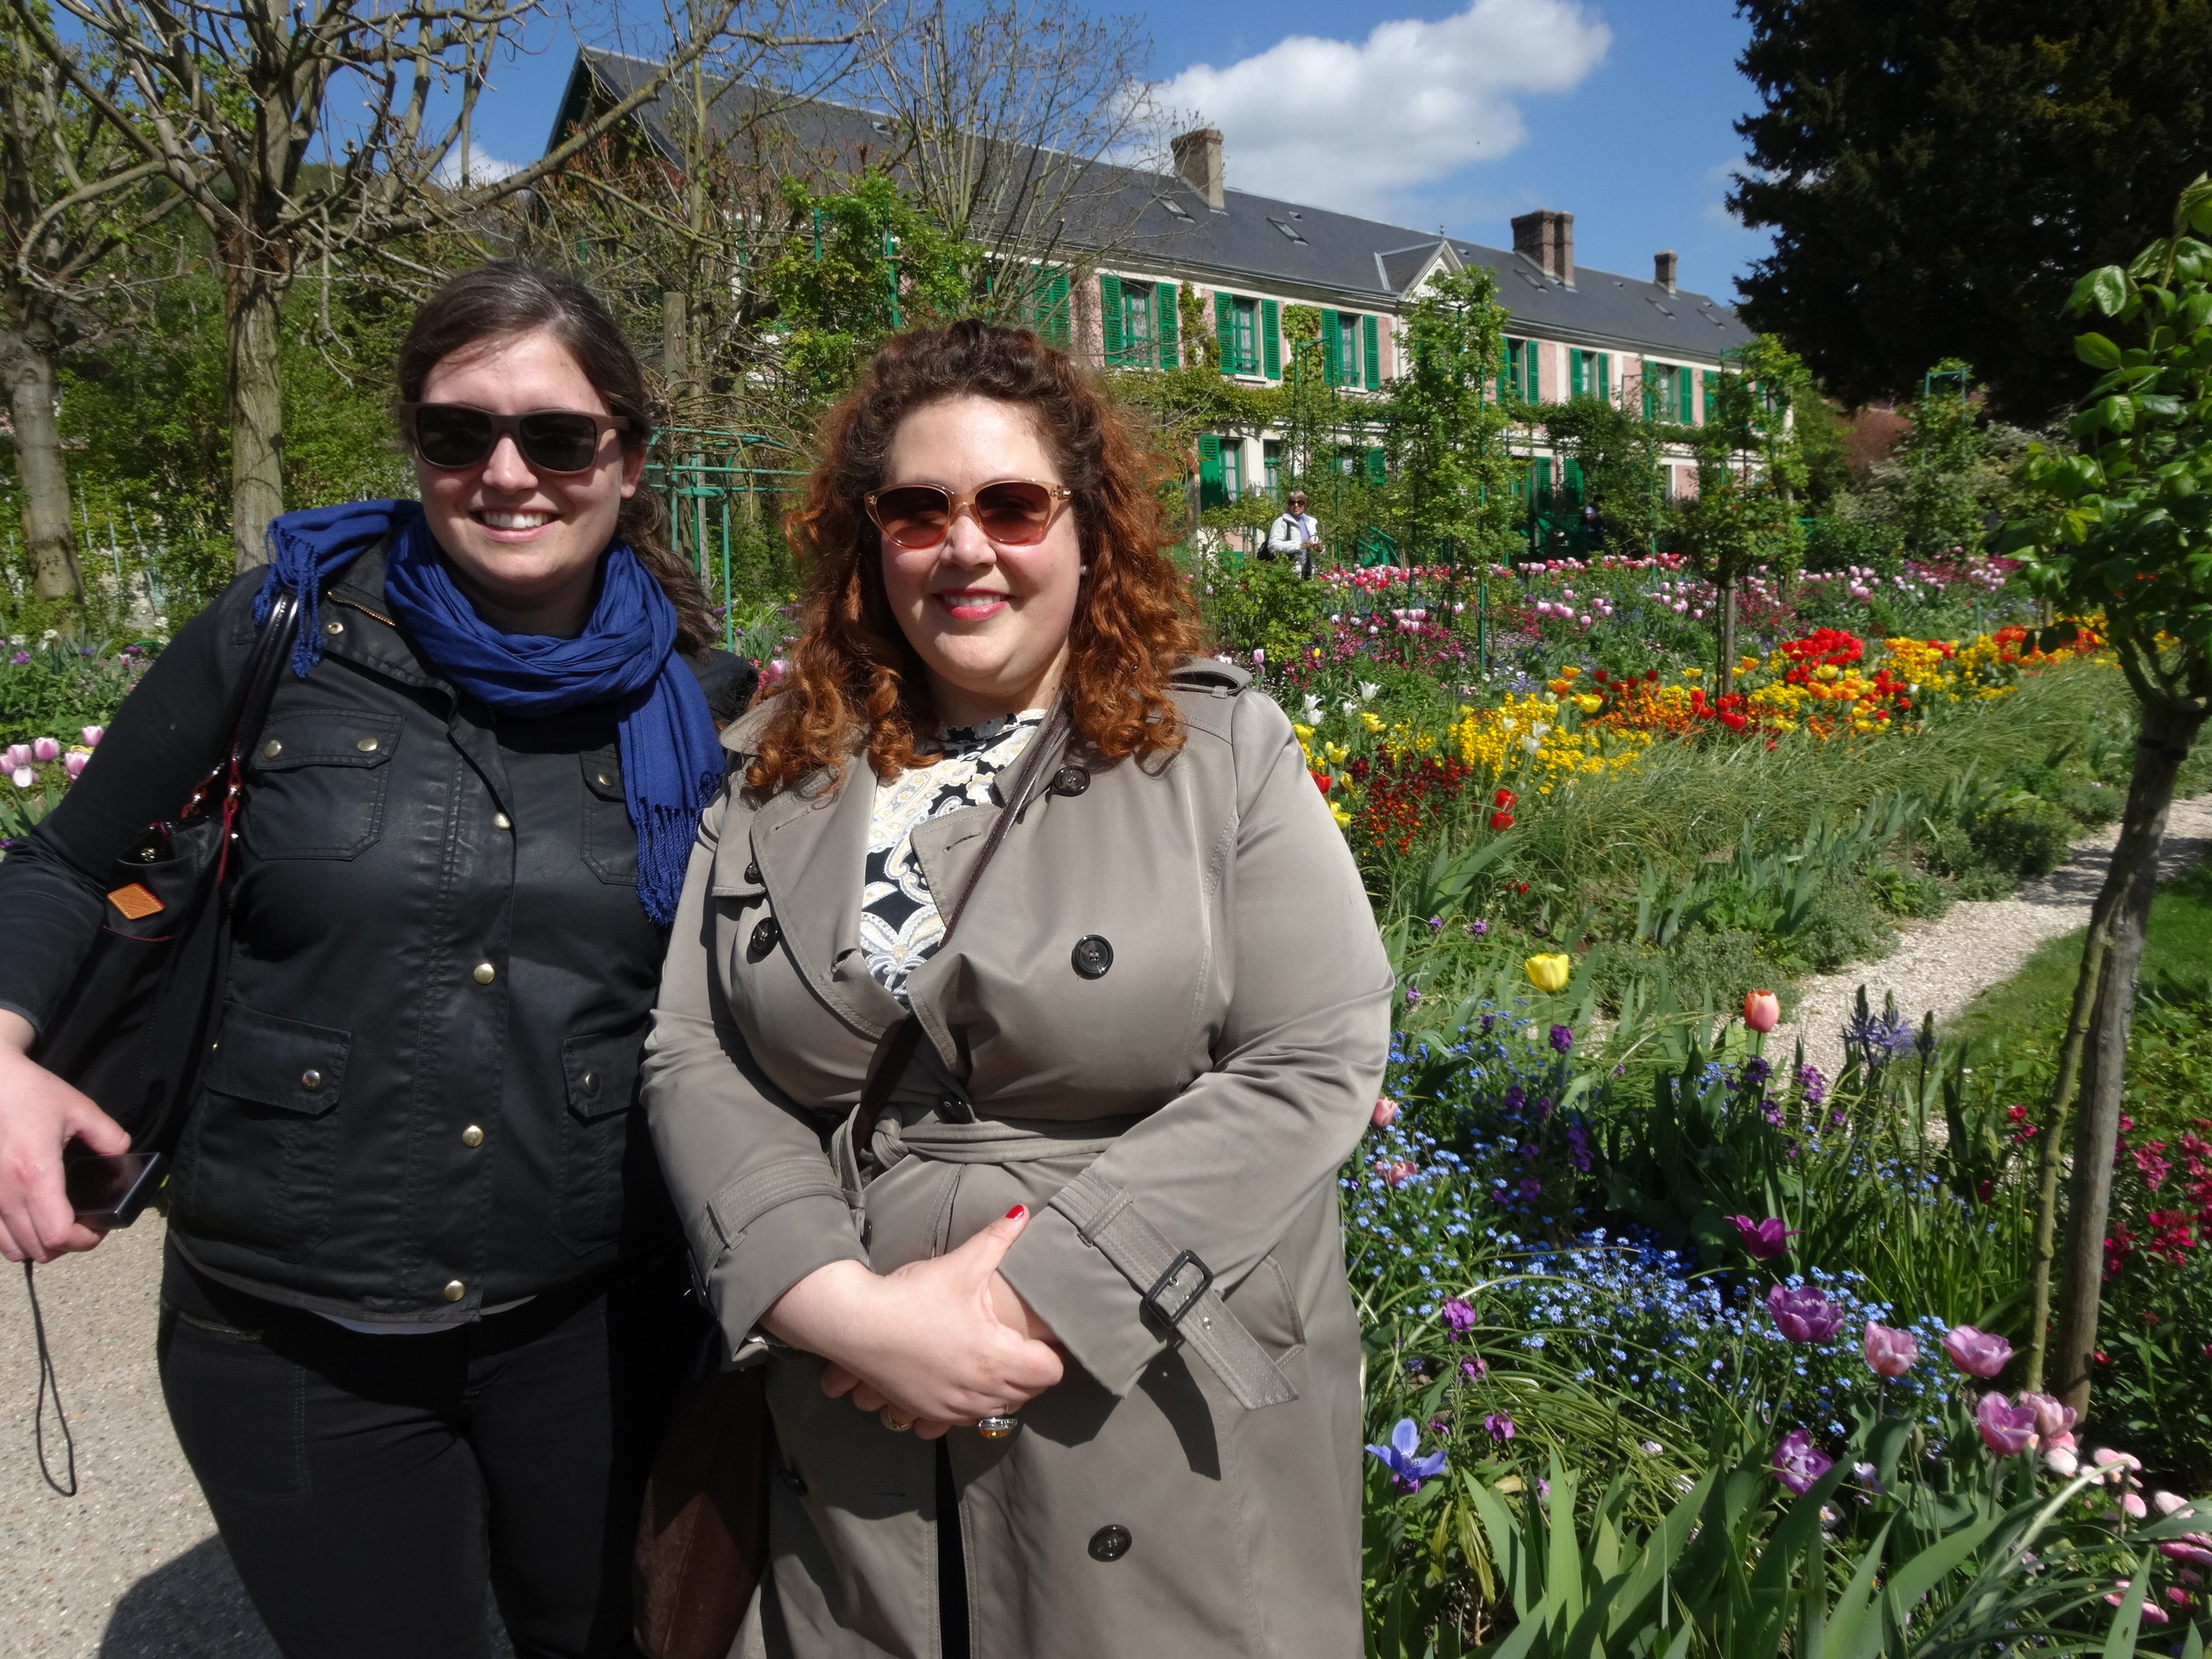 Julia and Meg in Monet's Garden in Giverny, France in 2014